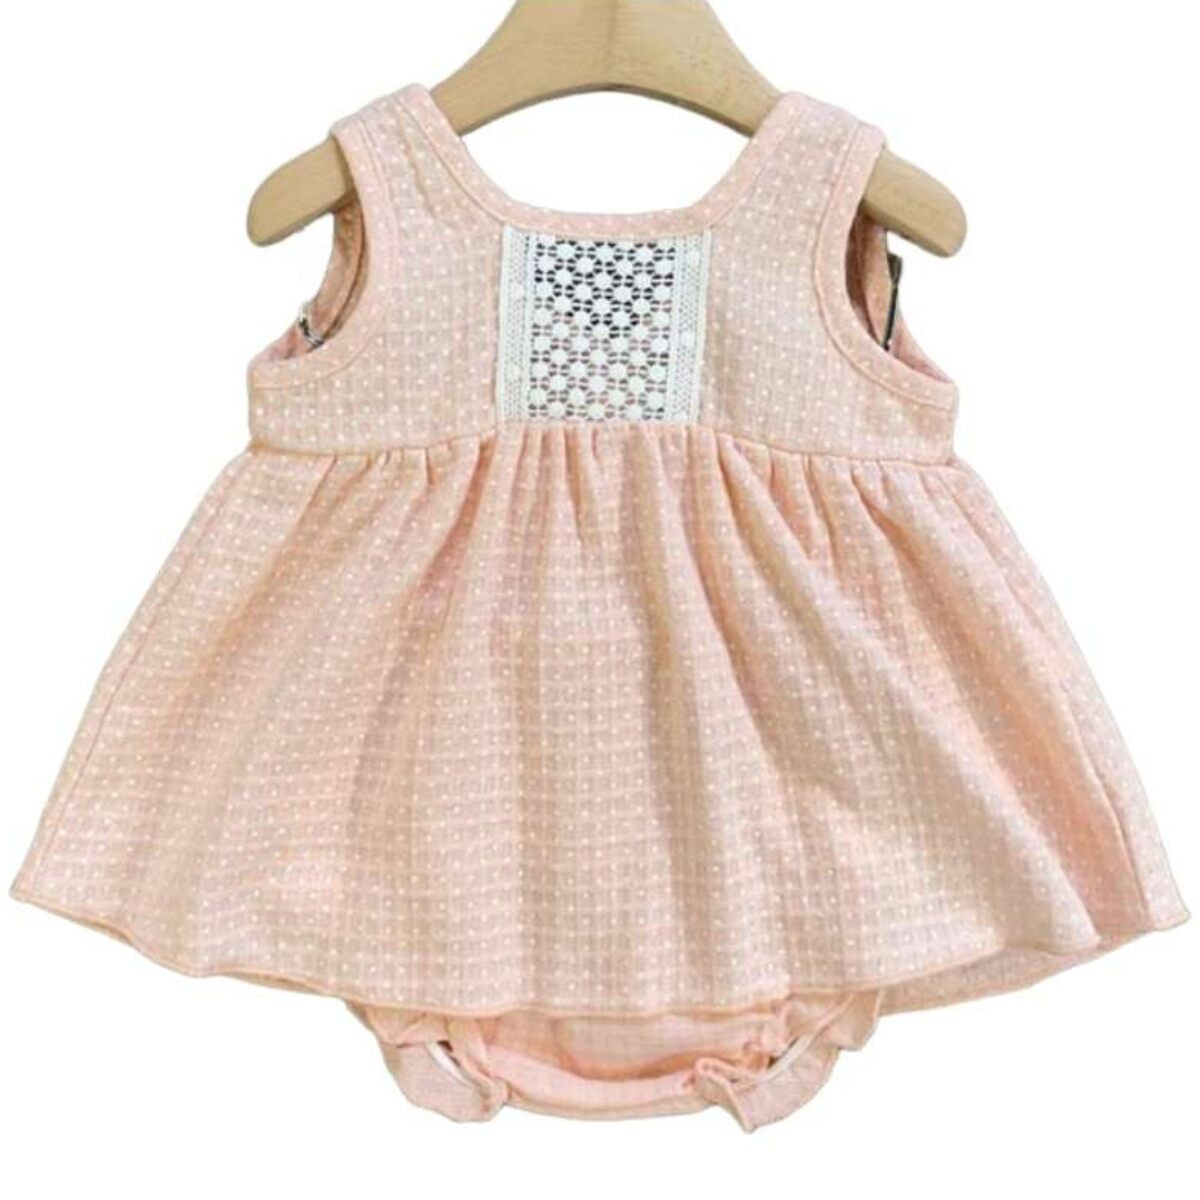 GIRLS FLOUNCED DRESS AND NAPPY COVER CALAMARO - 1